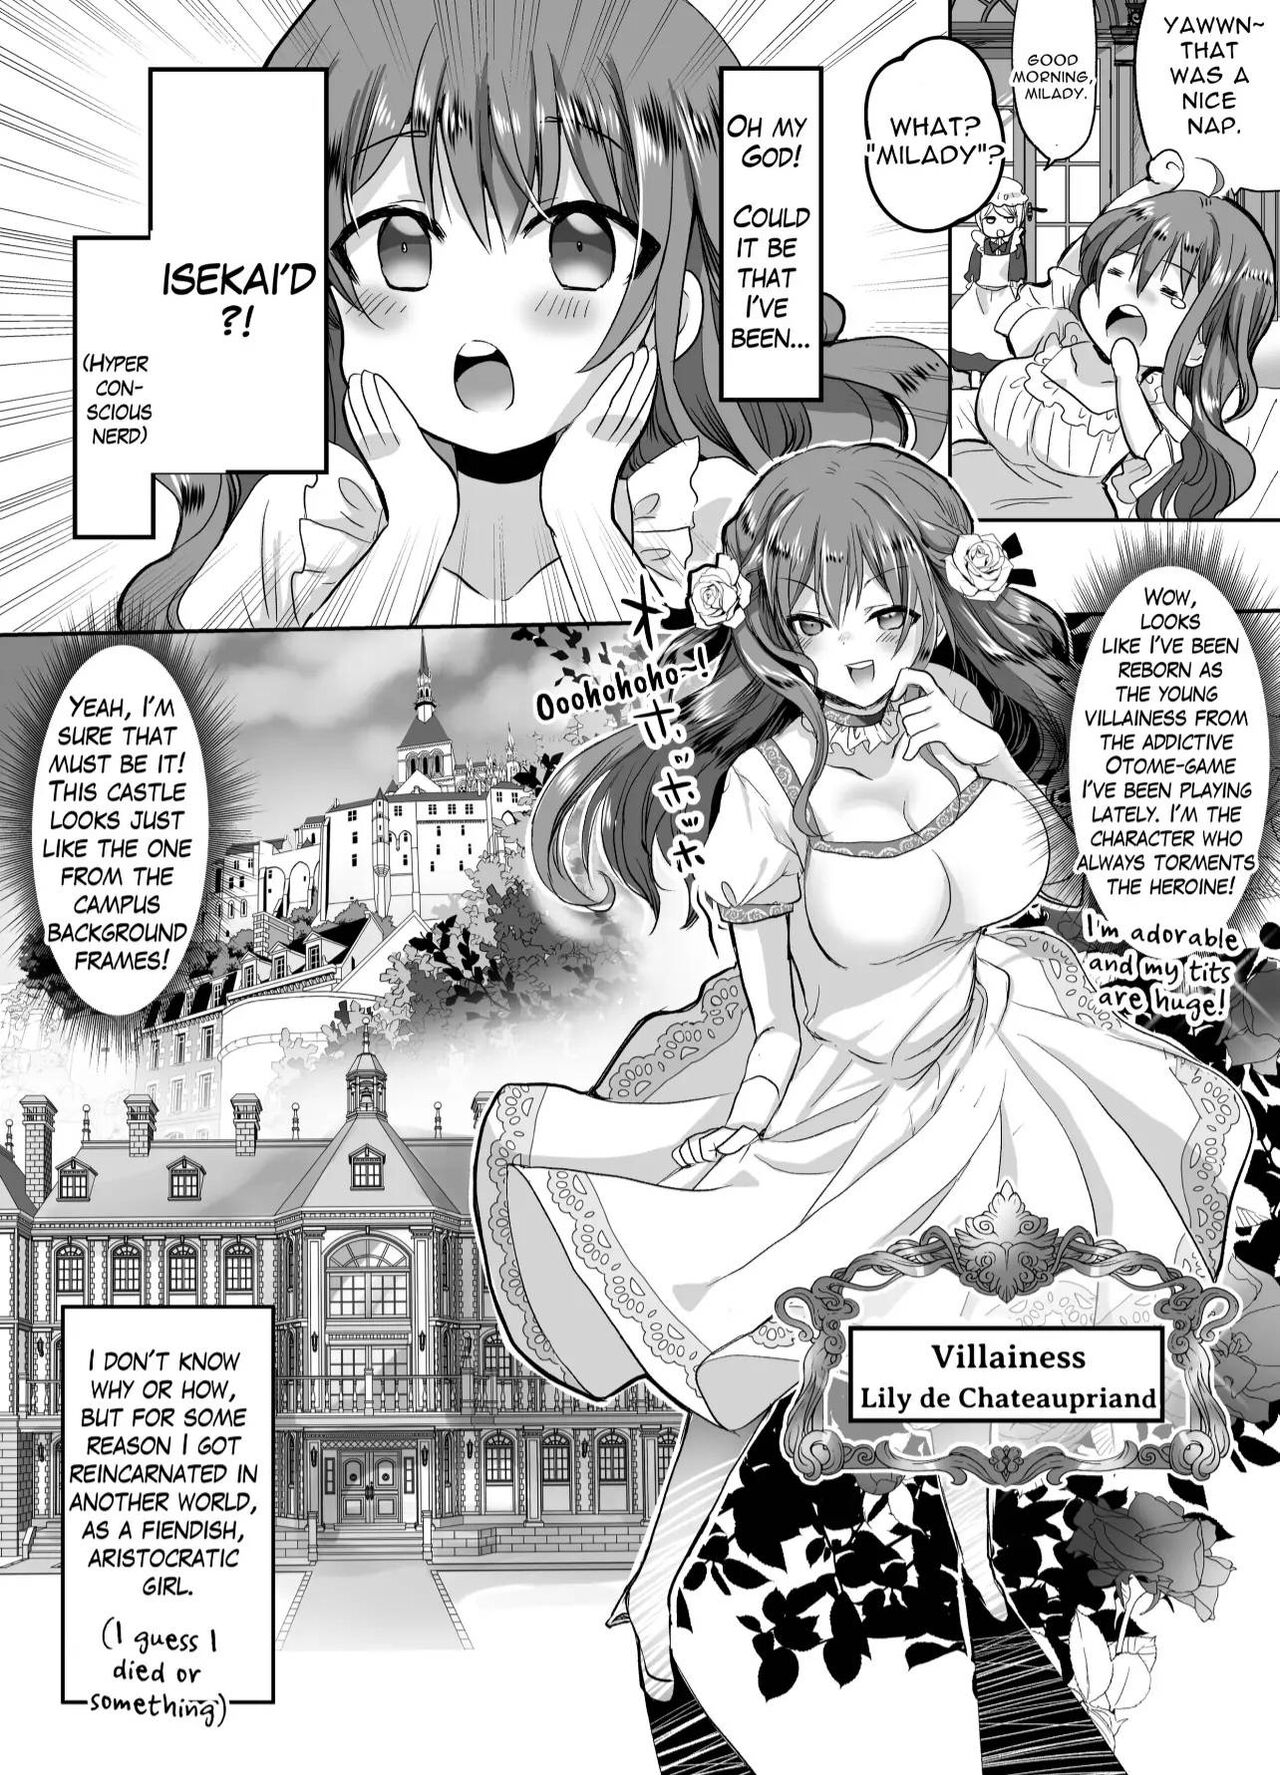 [Whisker Pad (Mofuo)] JK's Tragic Isekai Reincarnation as the Villainess ~But My Precious Side Character!~ [English] [Digital] 2